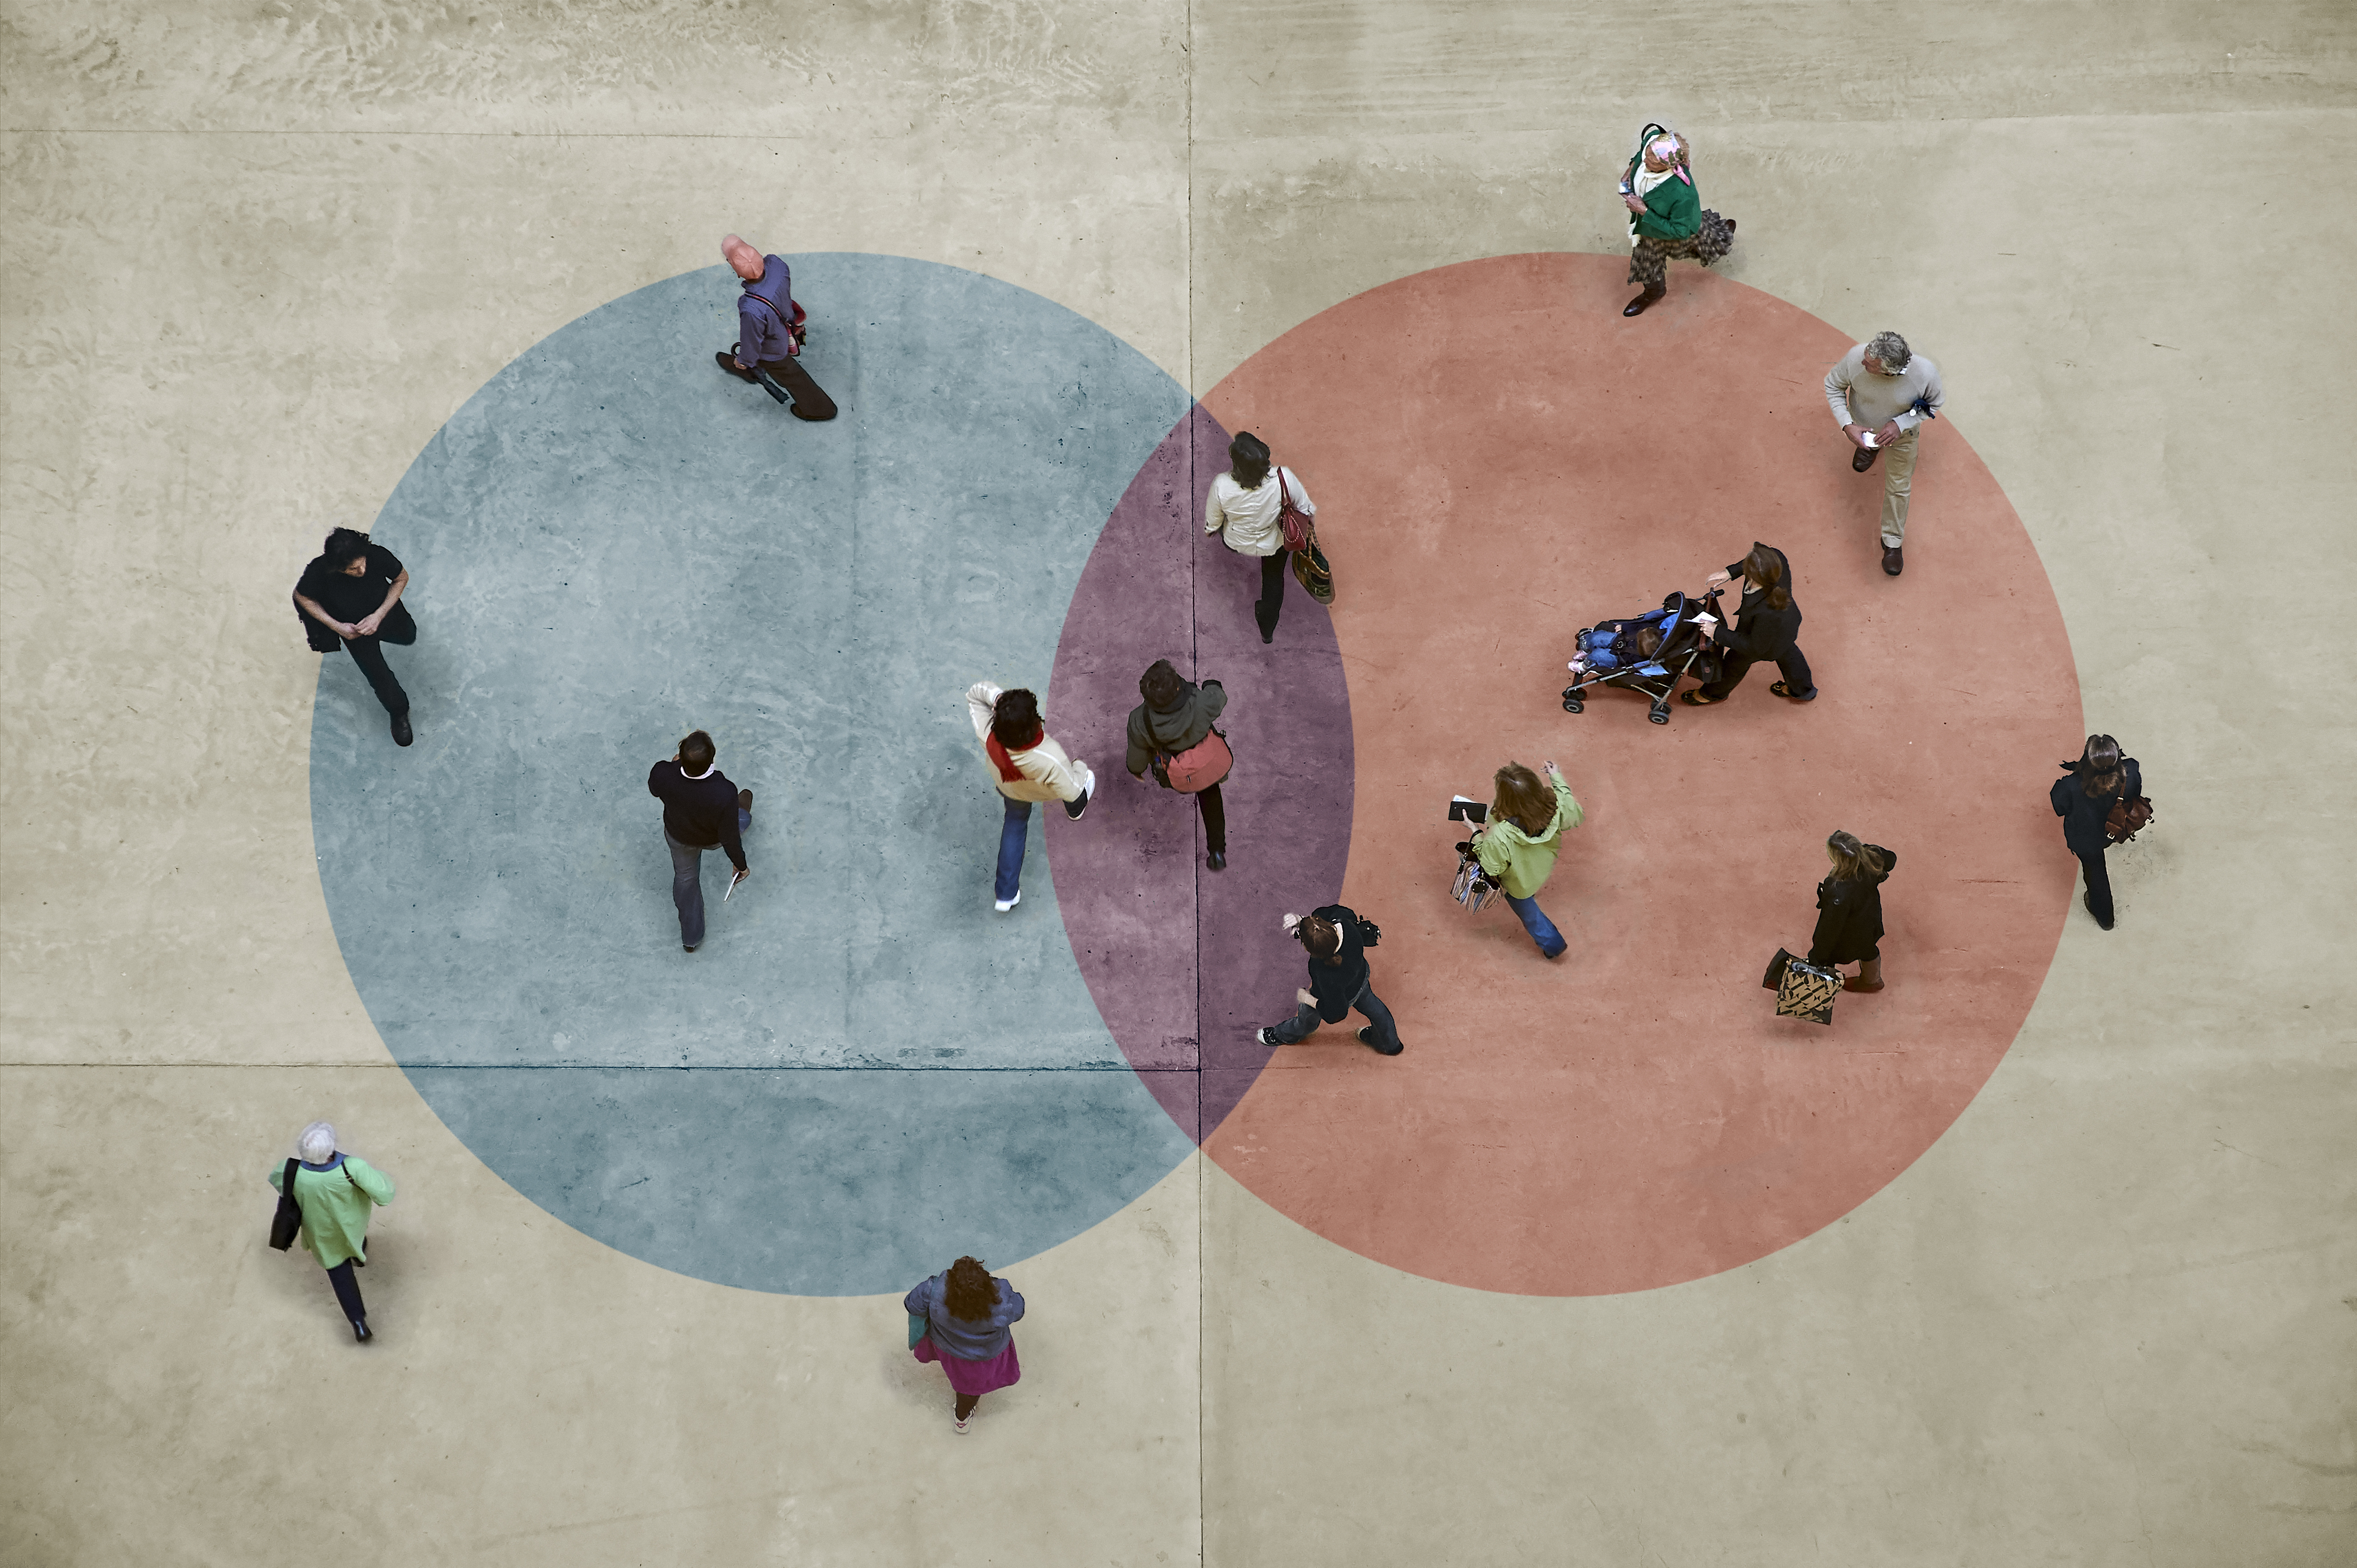 Image of overlapping blue and red circles with people standing in and around both.